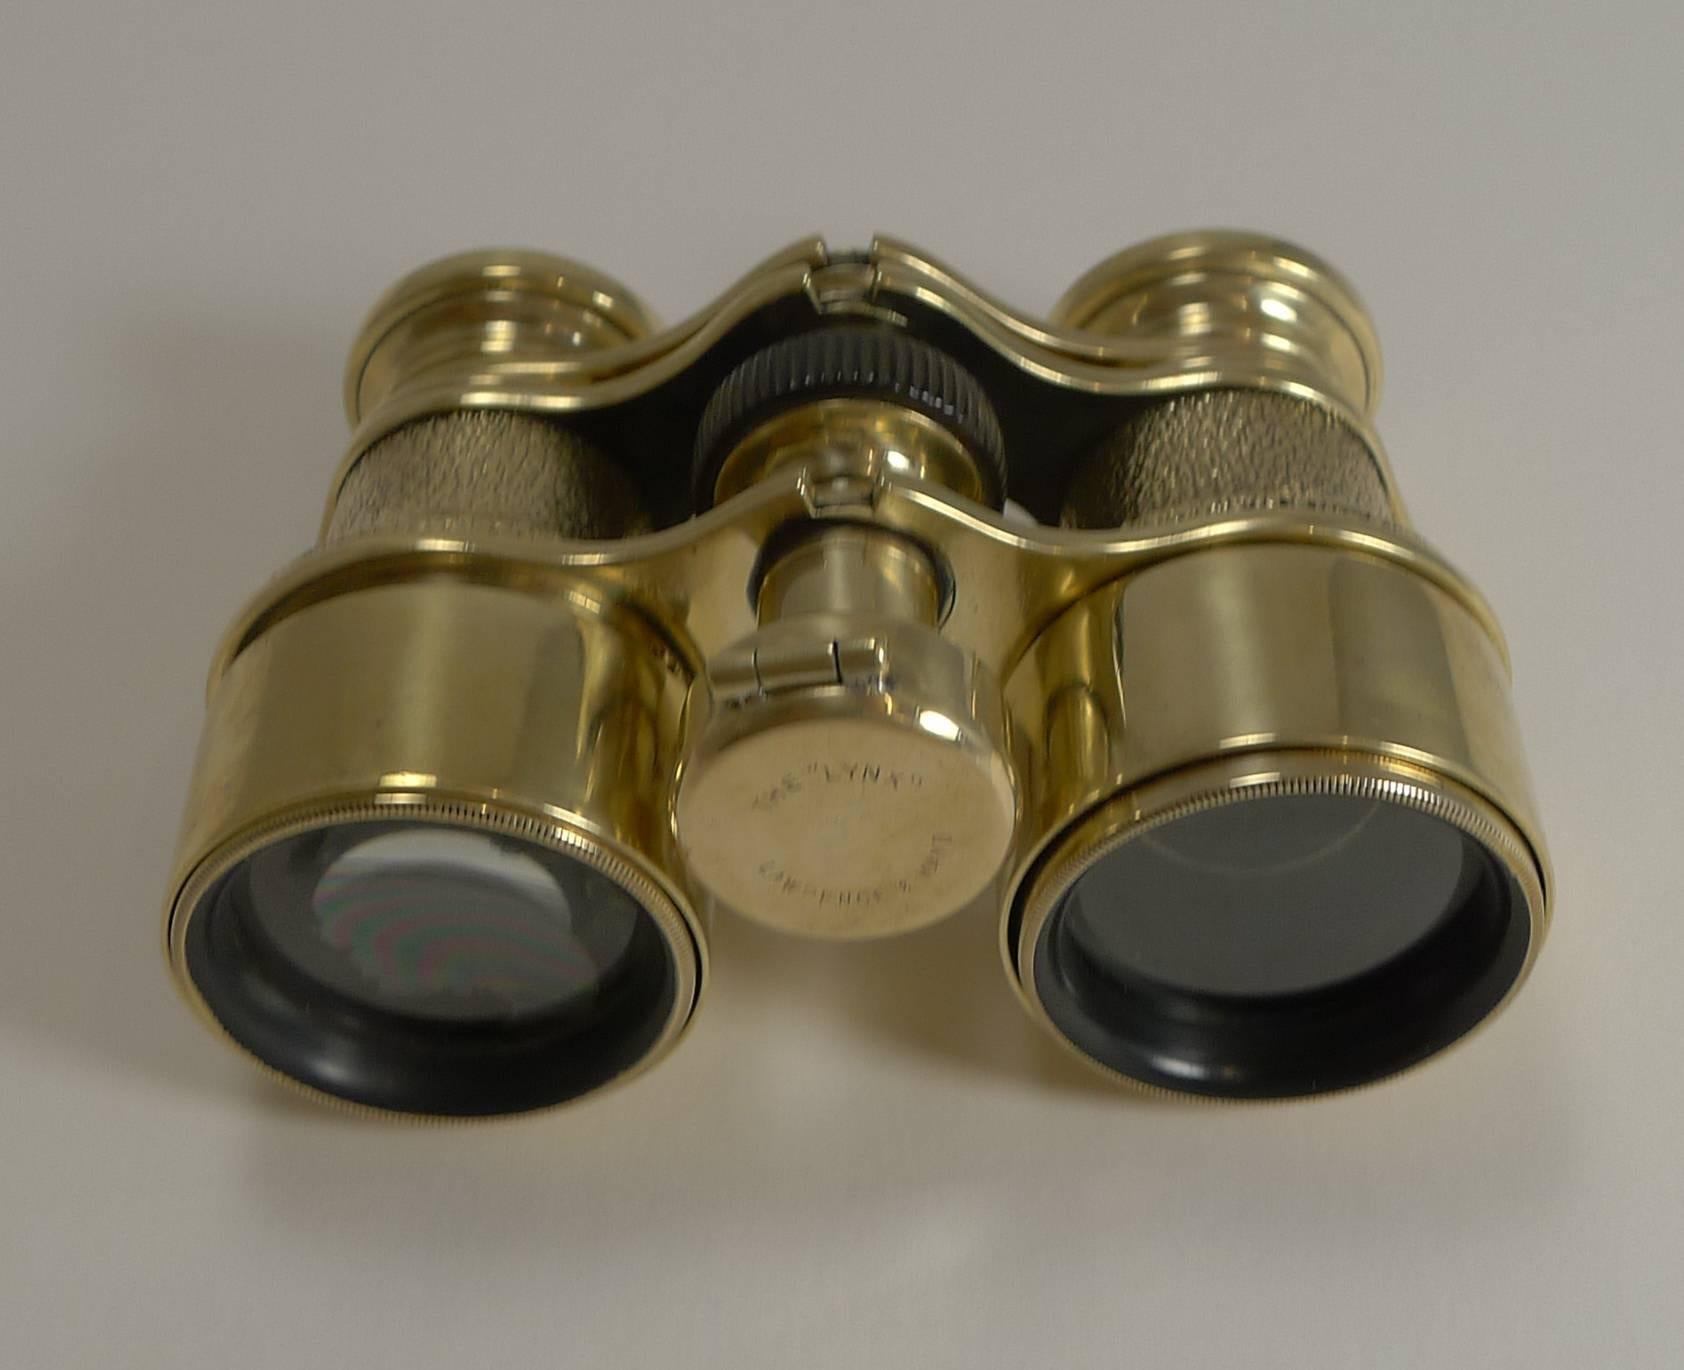 20th Century Antique English Field Glasses or Binoculars by Lawrence and Mayo, with Compass